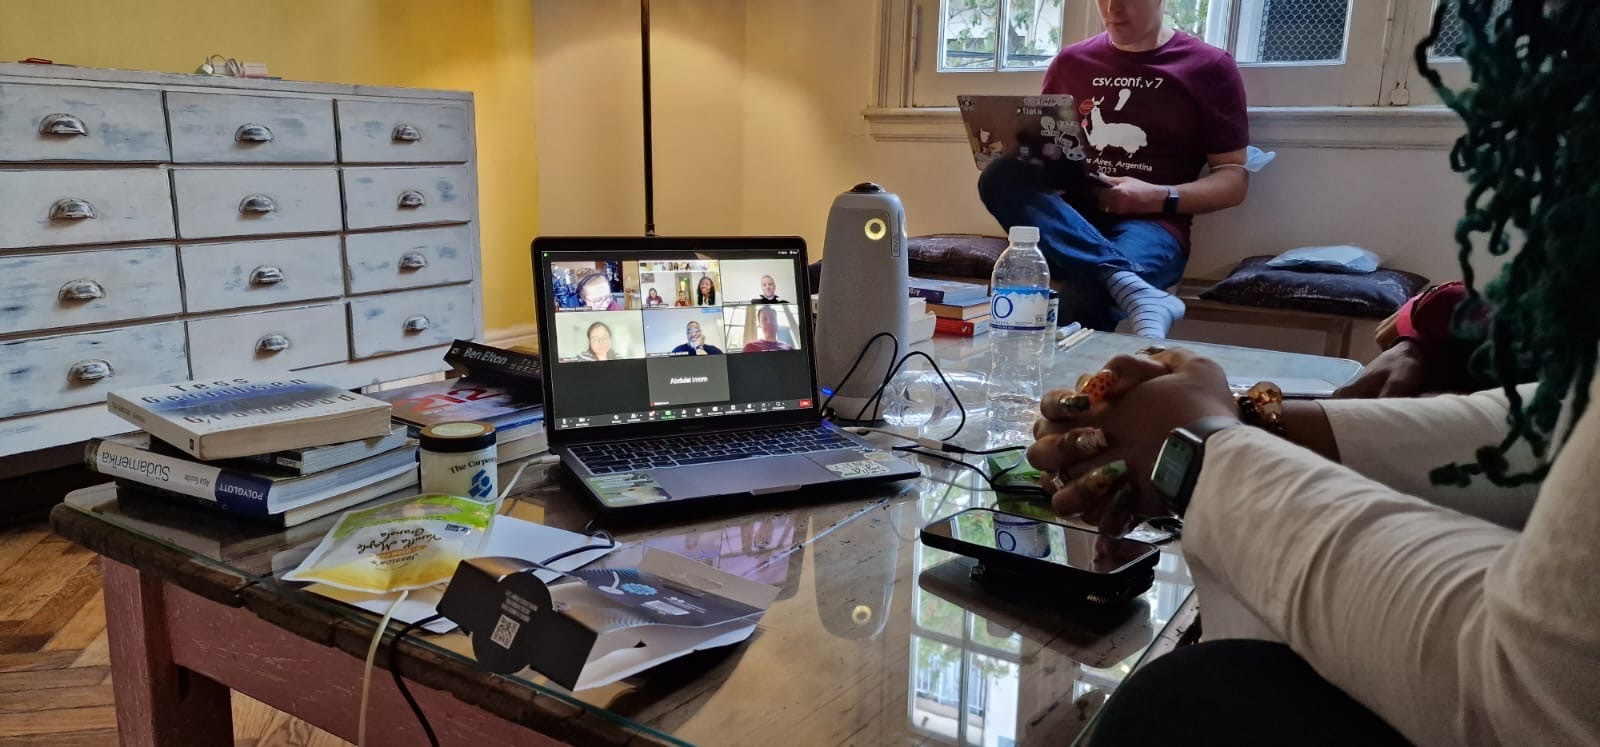 Executive Council member viewing an open laptop with virtual Executive Council members shown on the screen. Next to the laptop sits the Meeting Owl